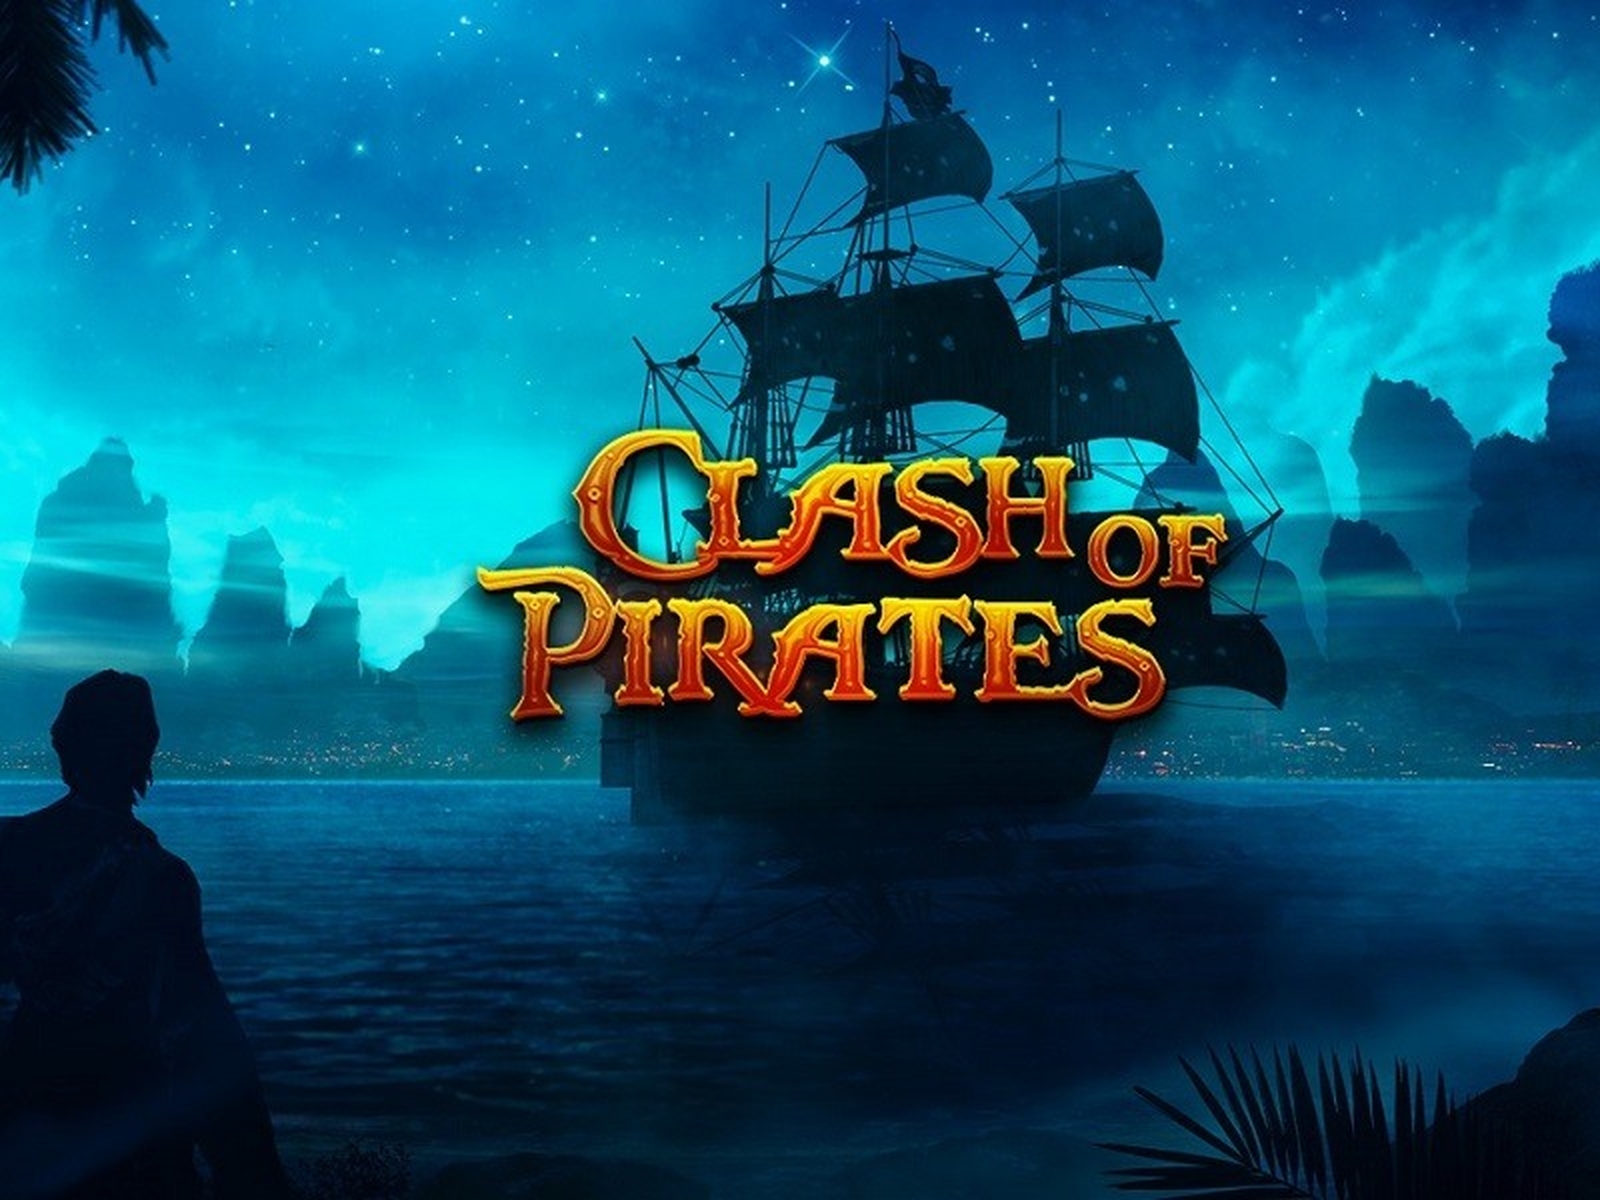 The Clash of Pirates Online Slot Demo Game by Evoplay Entertainment